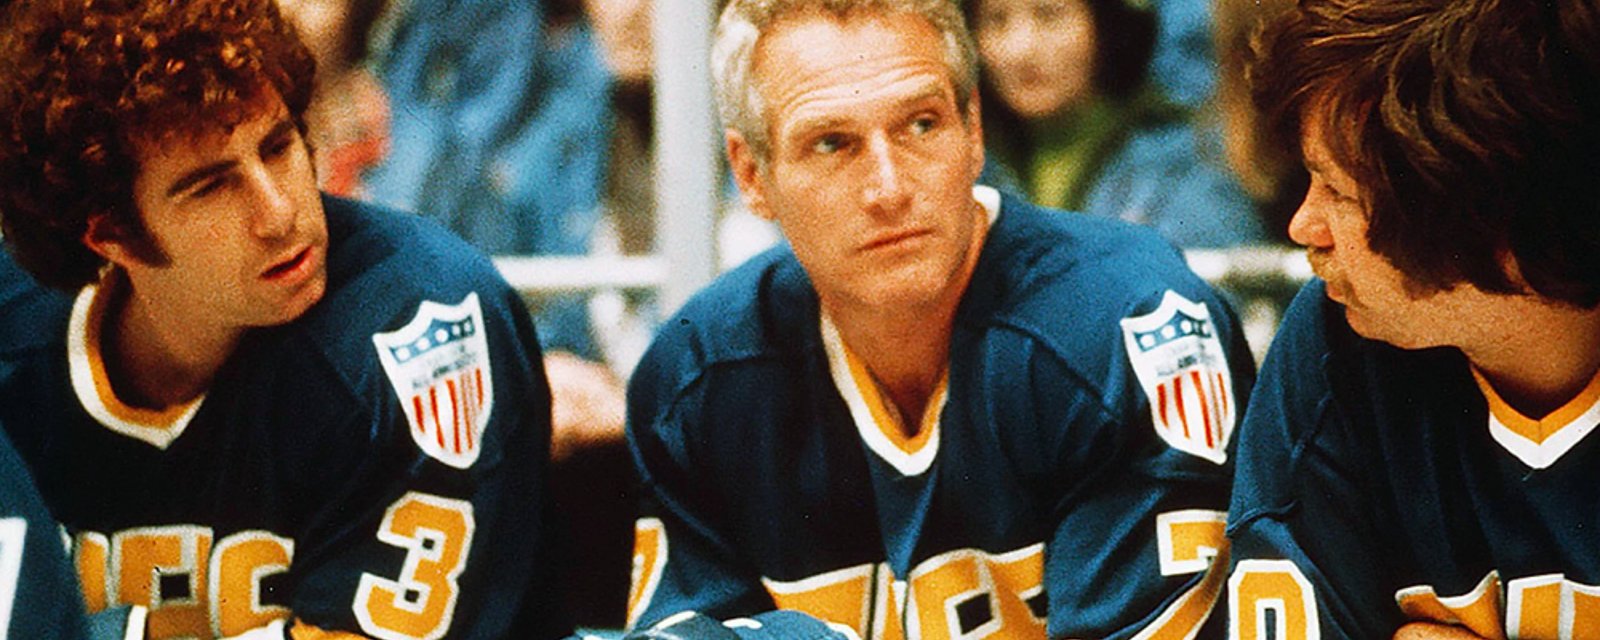 The 99 best sports movies of all-time according to IMDB